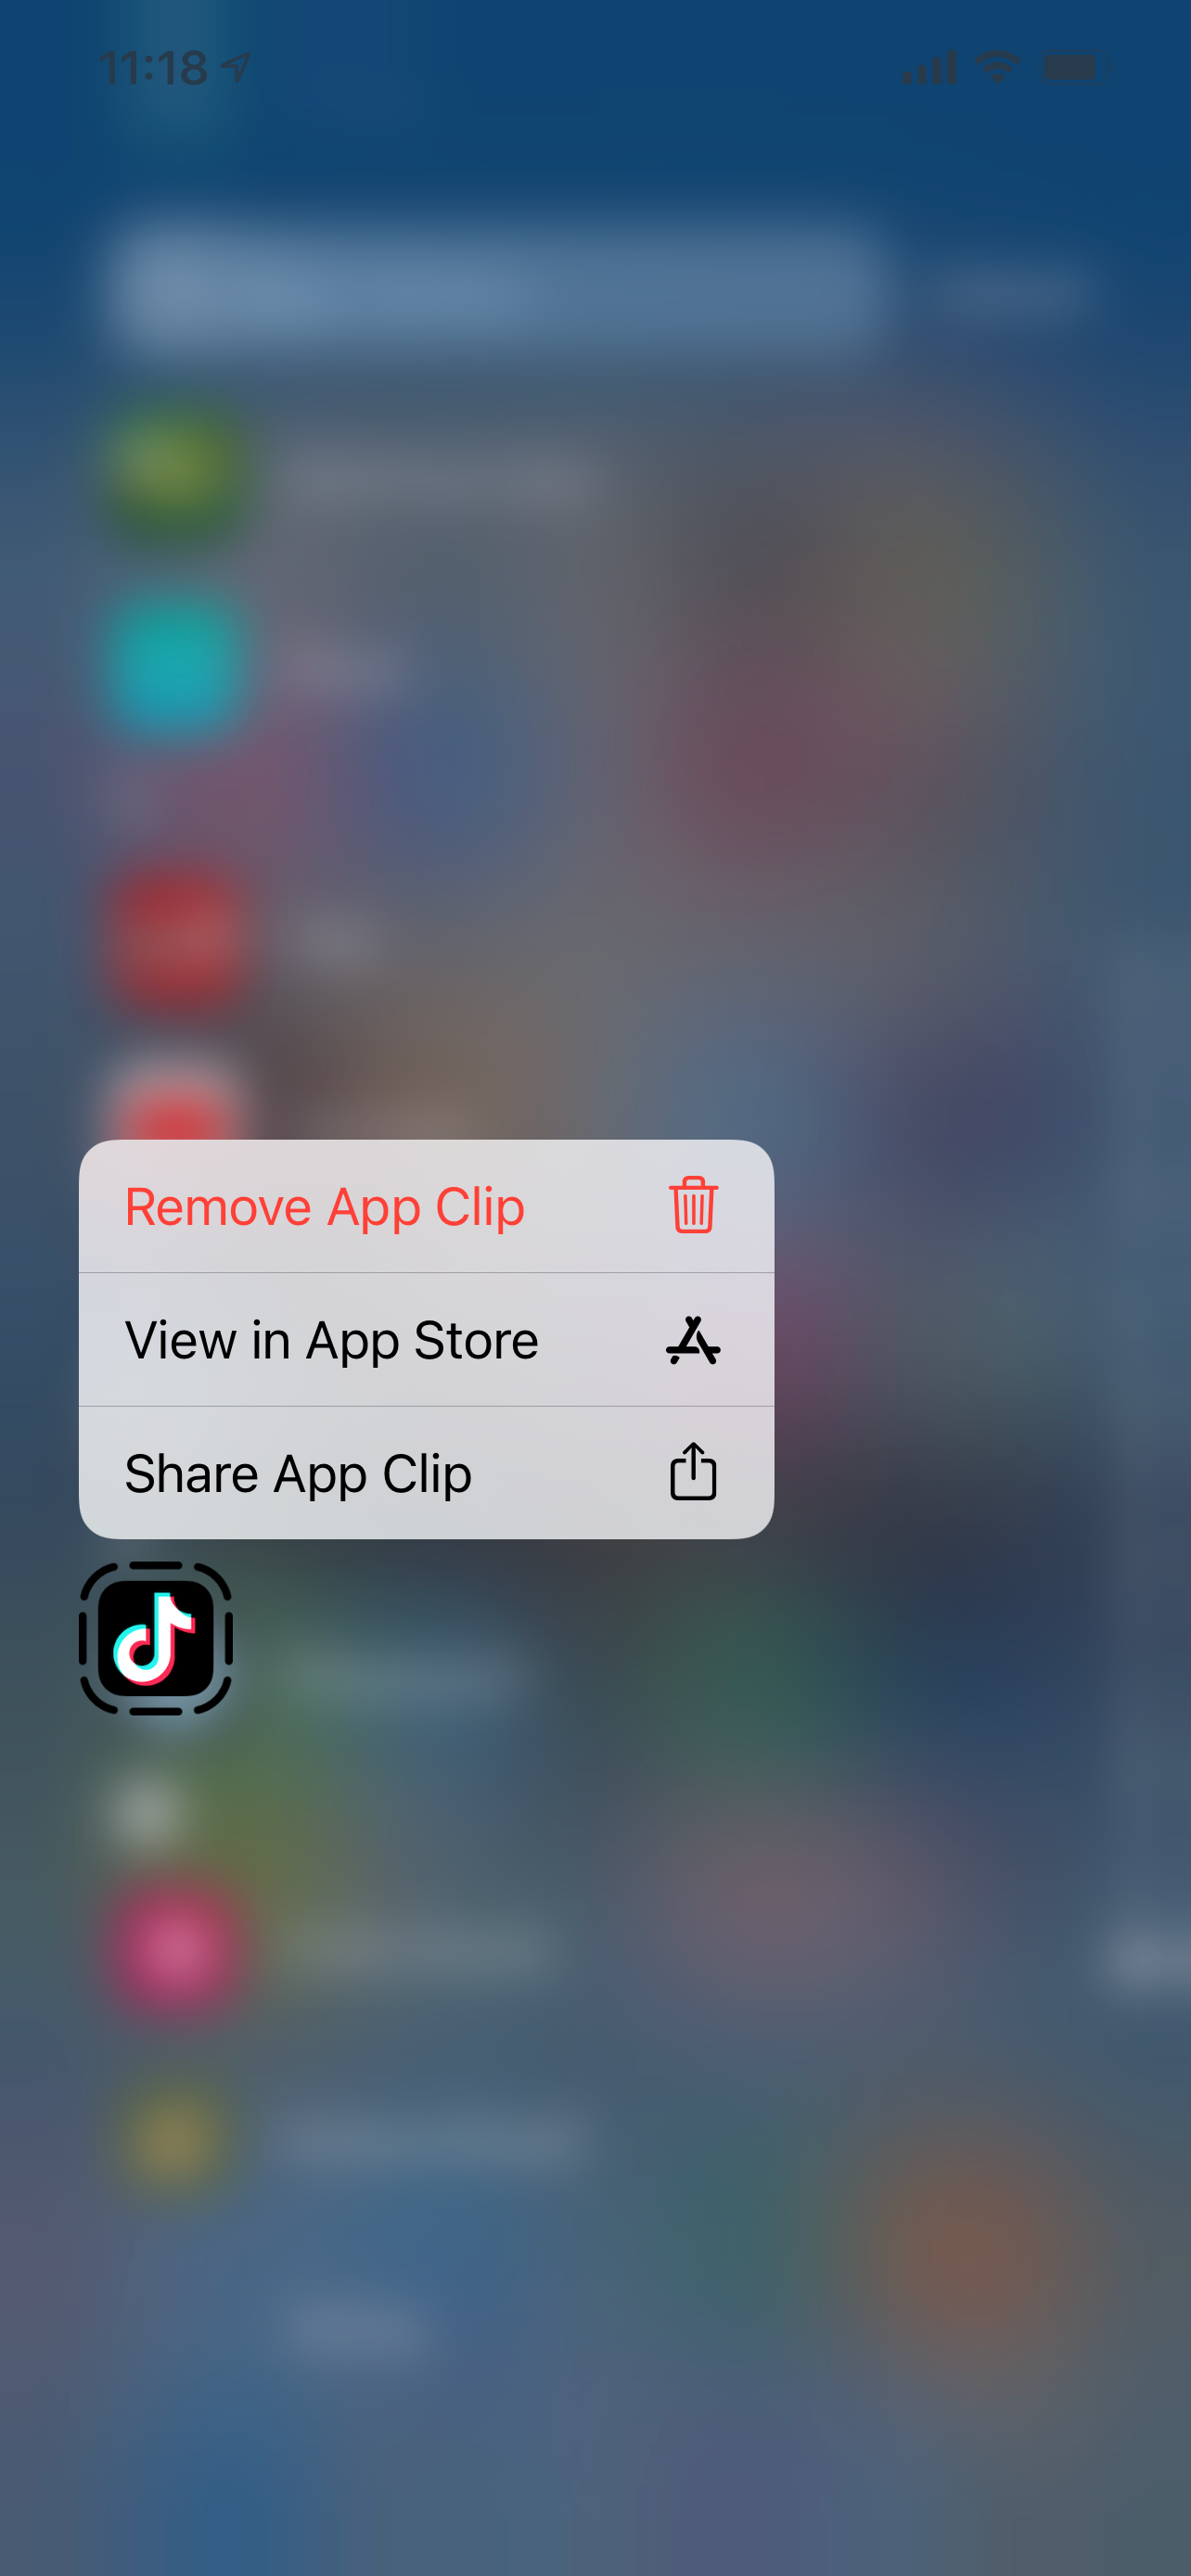 Delete an App Clip from the App Library